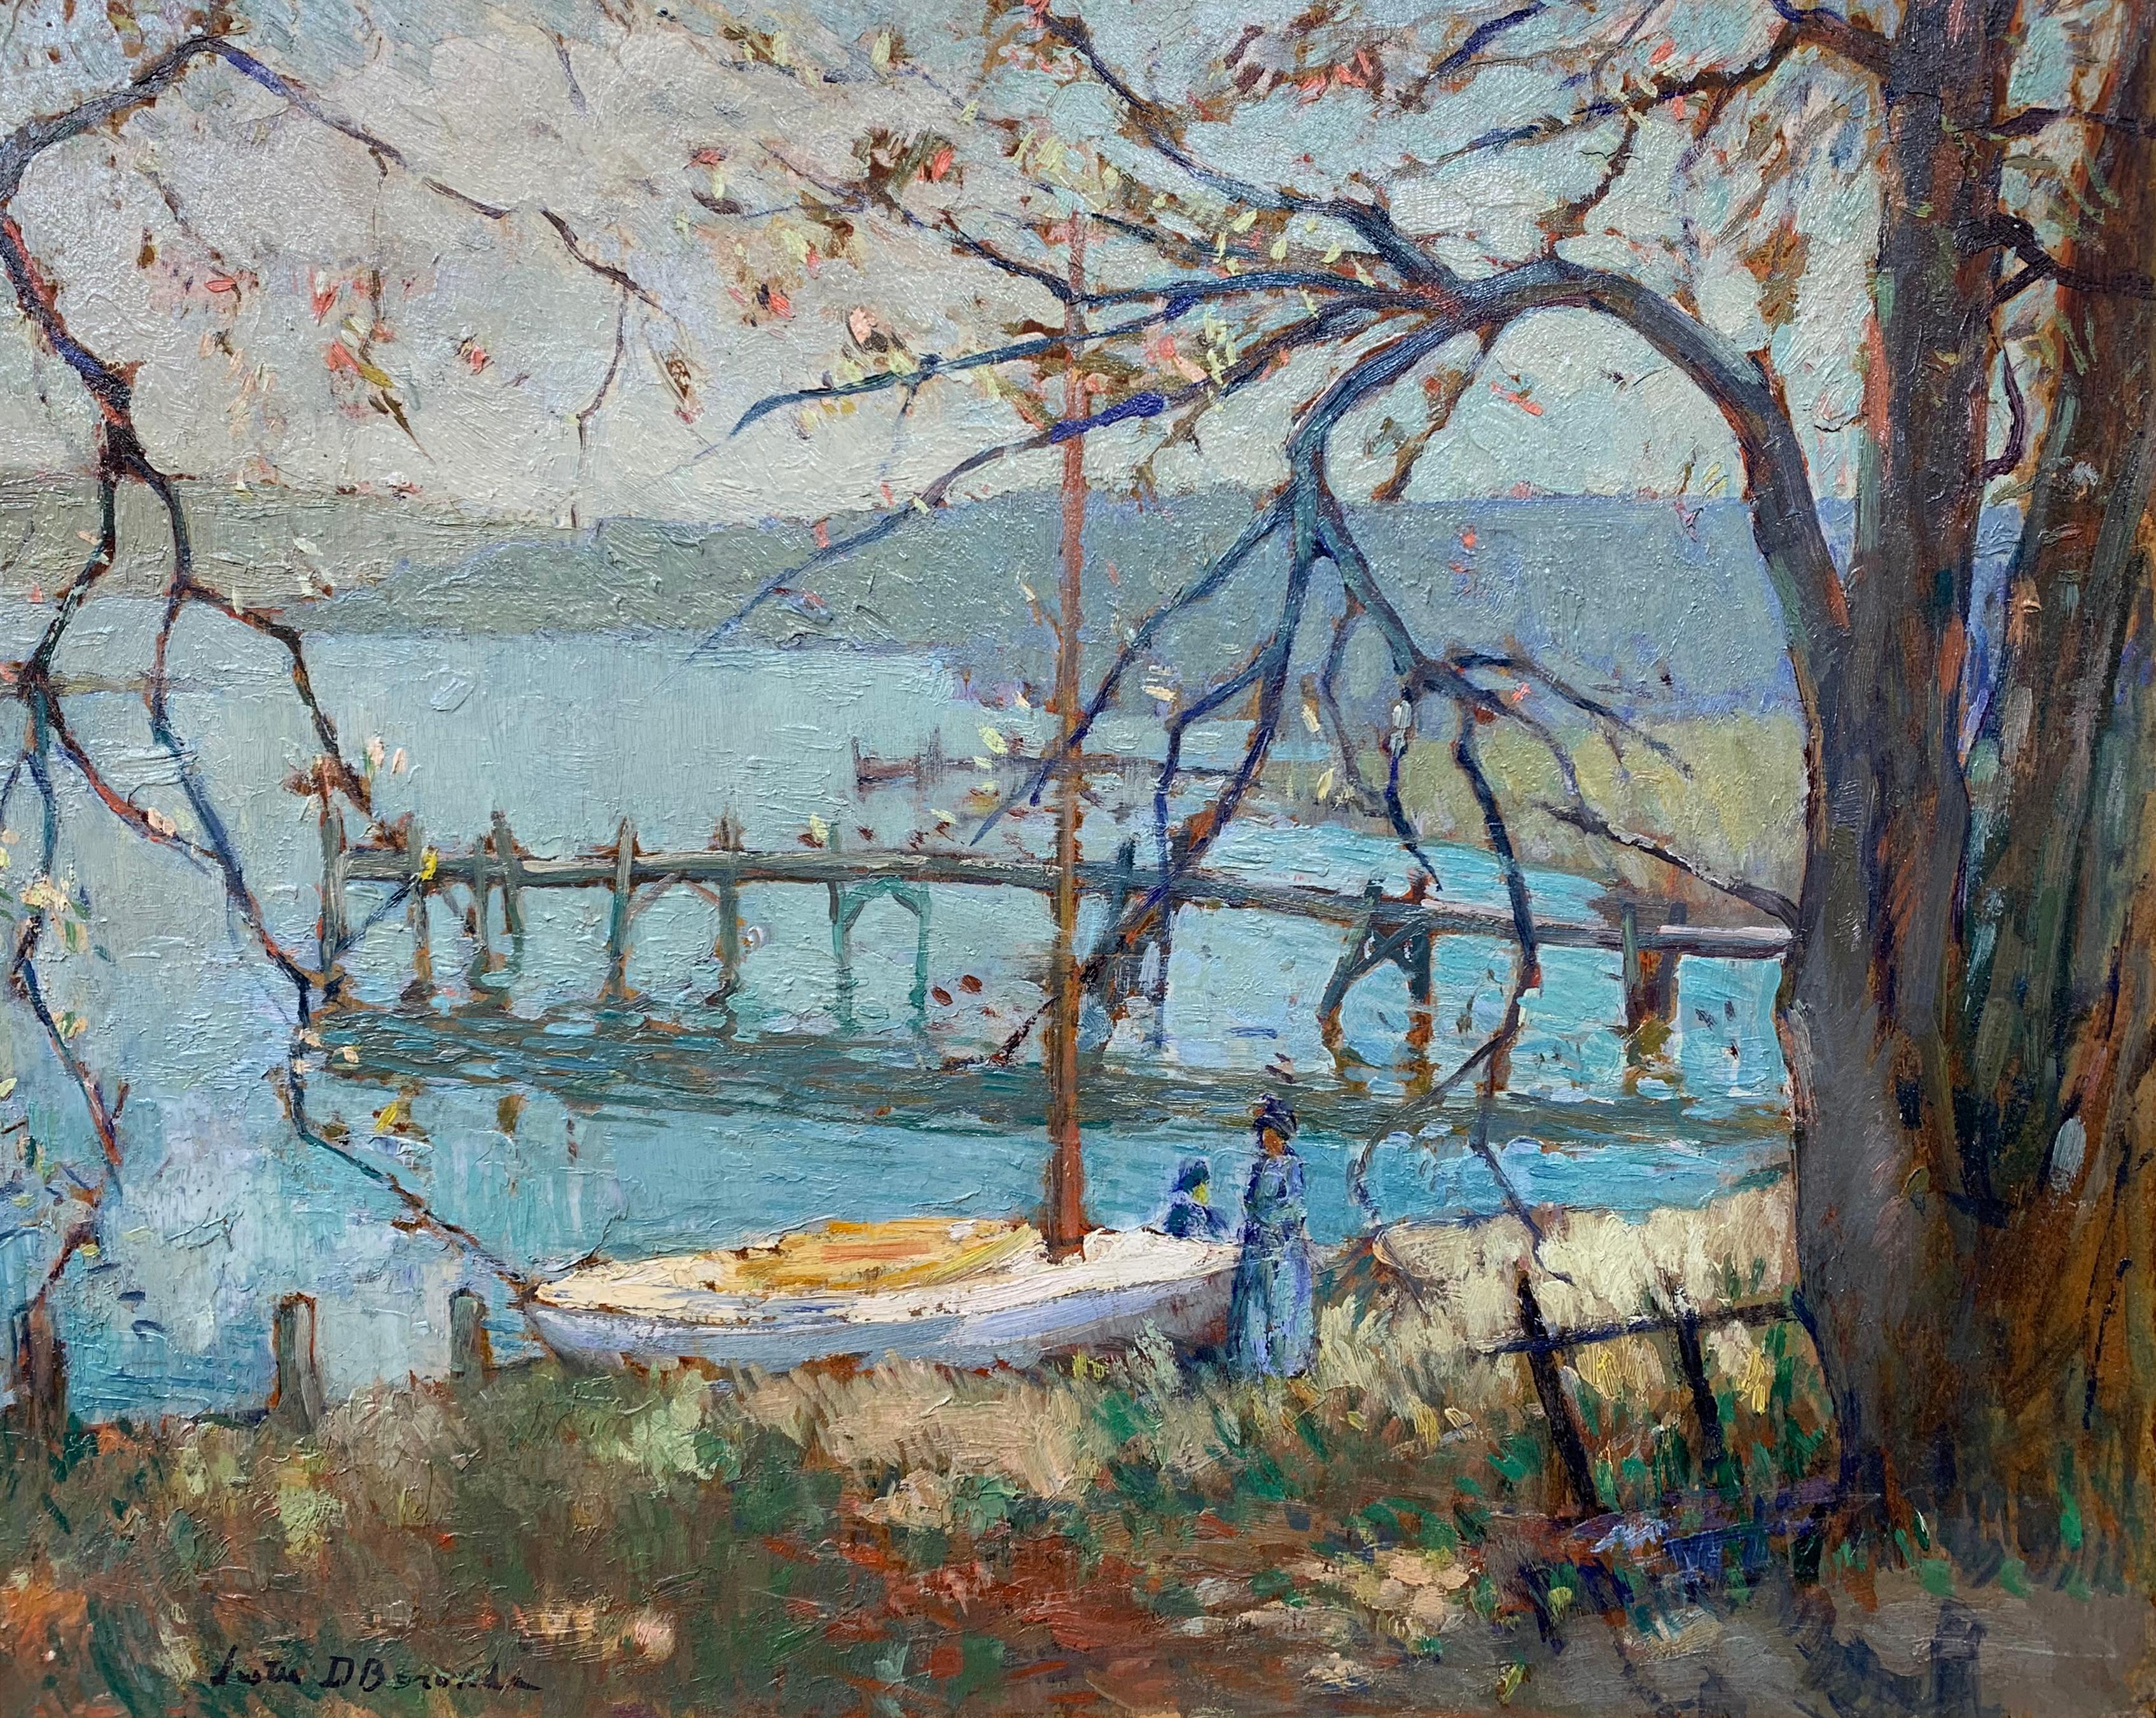 Quiet Cove, American Impressionist Seascape with Boats and Figures - Painting by Lester David Boronda